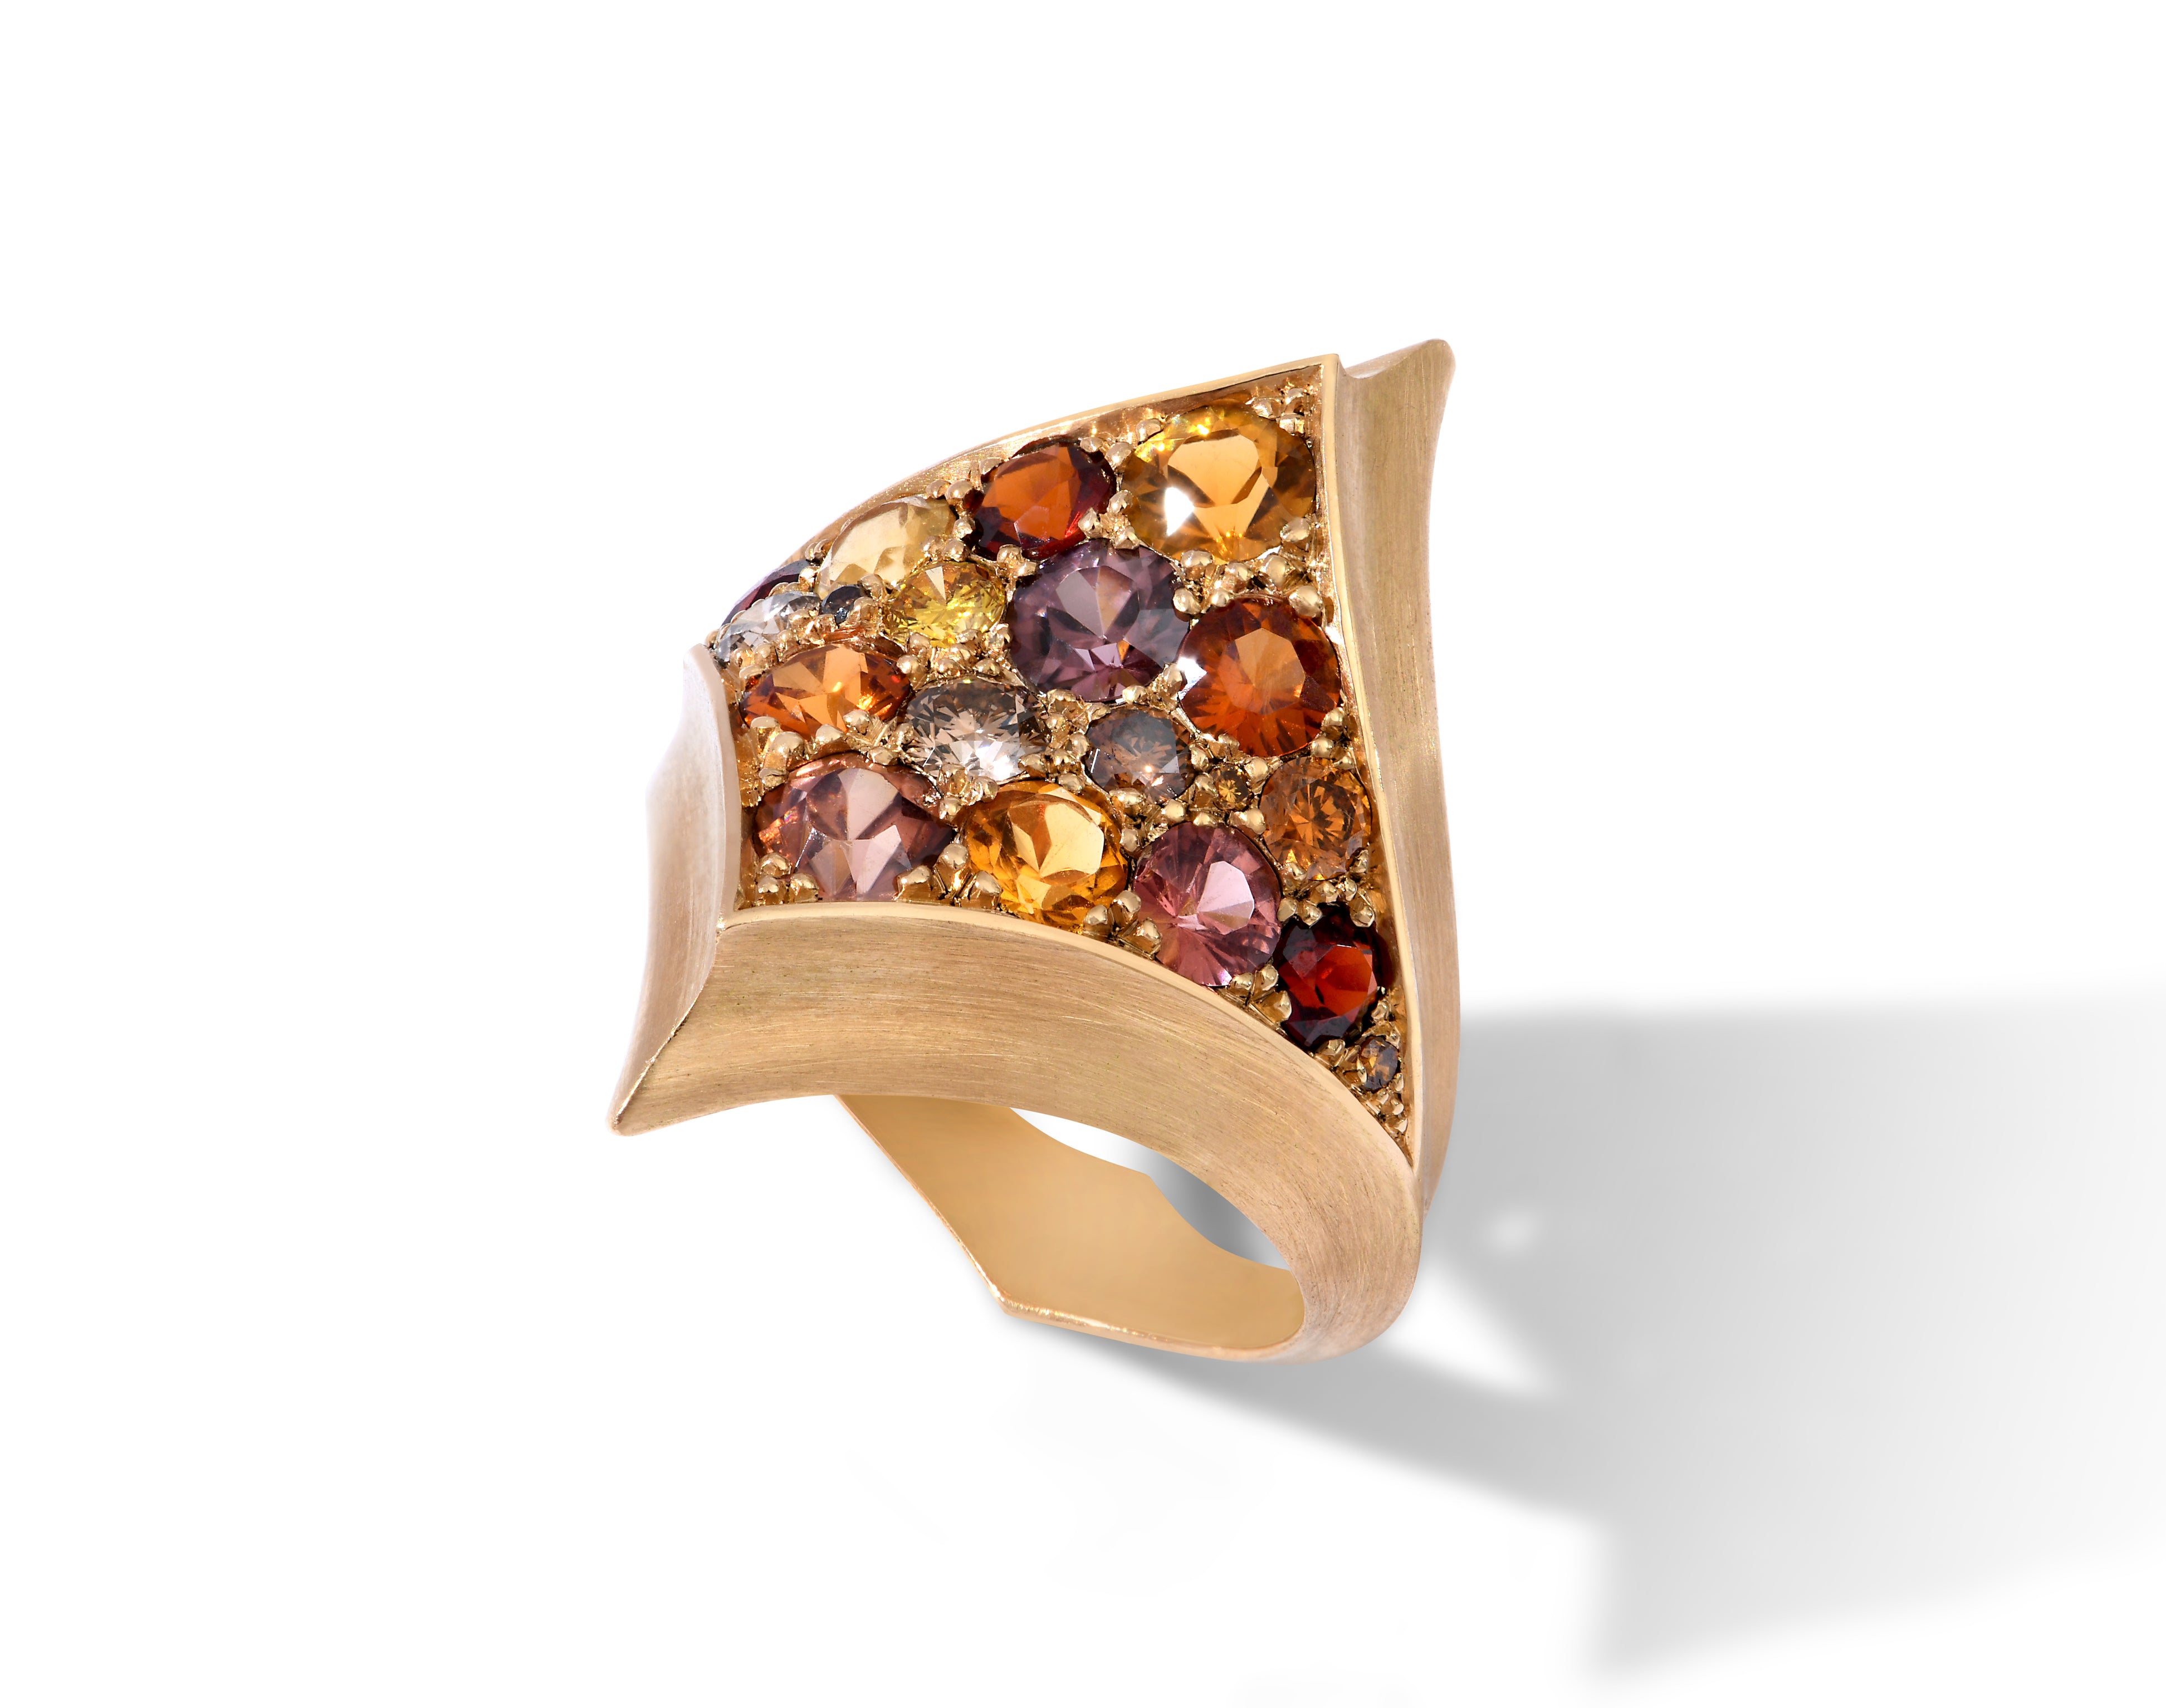 capucine h, fine jewelry, jewelry designer, gold ring, gold jewelry, unique jewelry, high craftsmanship, colored gemstones, 18 karat gold, best jewelry, art jewel, jewelry creations, sustainable jewelry, climate change